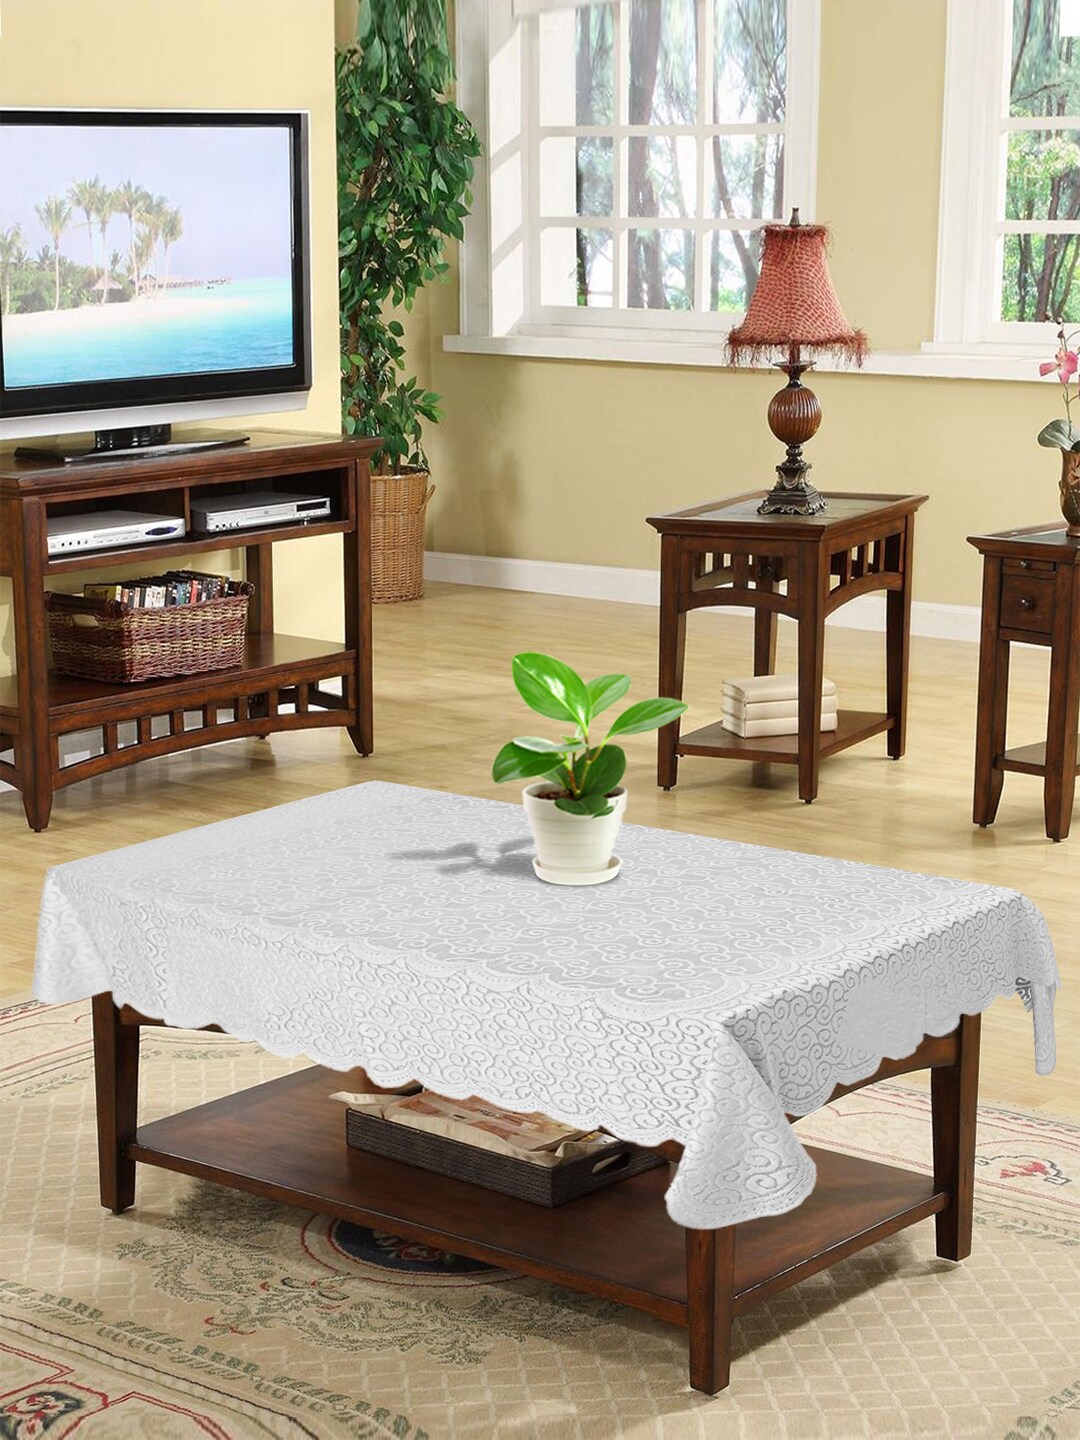 Kuber Industries White Self Design 4 Seater Cotton Table Cover